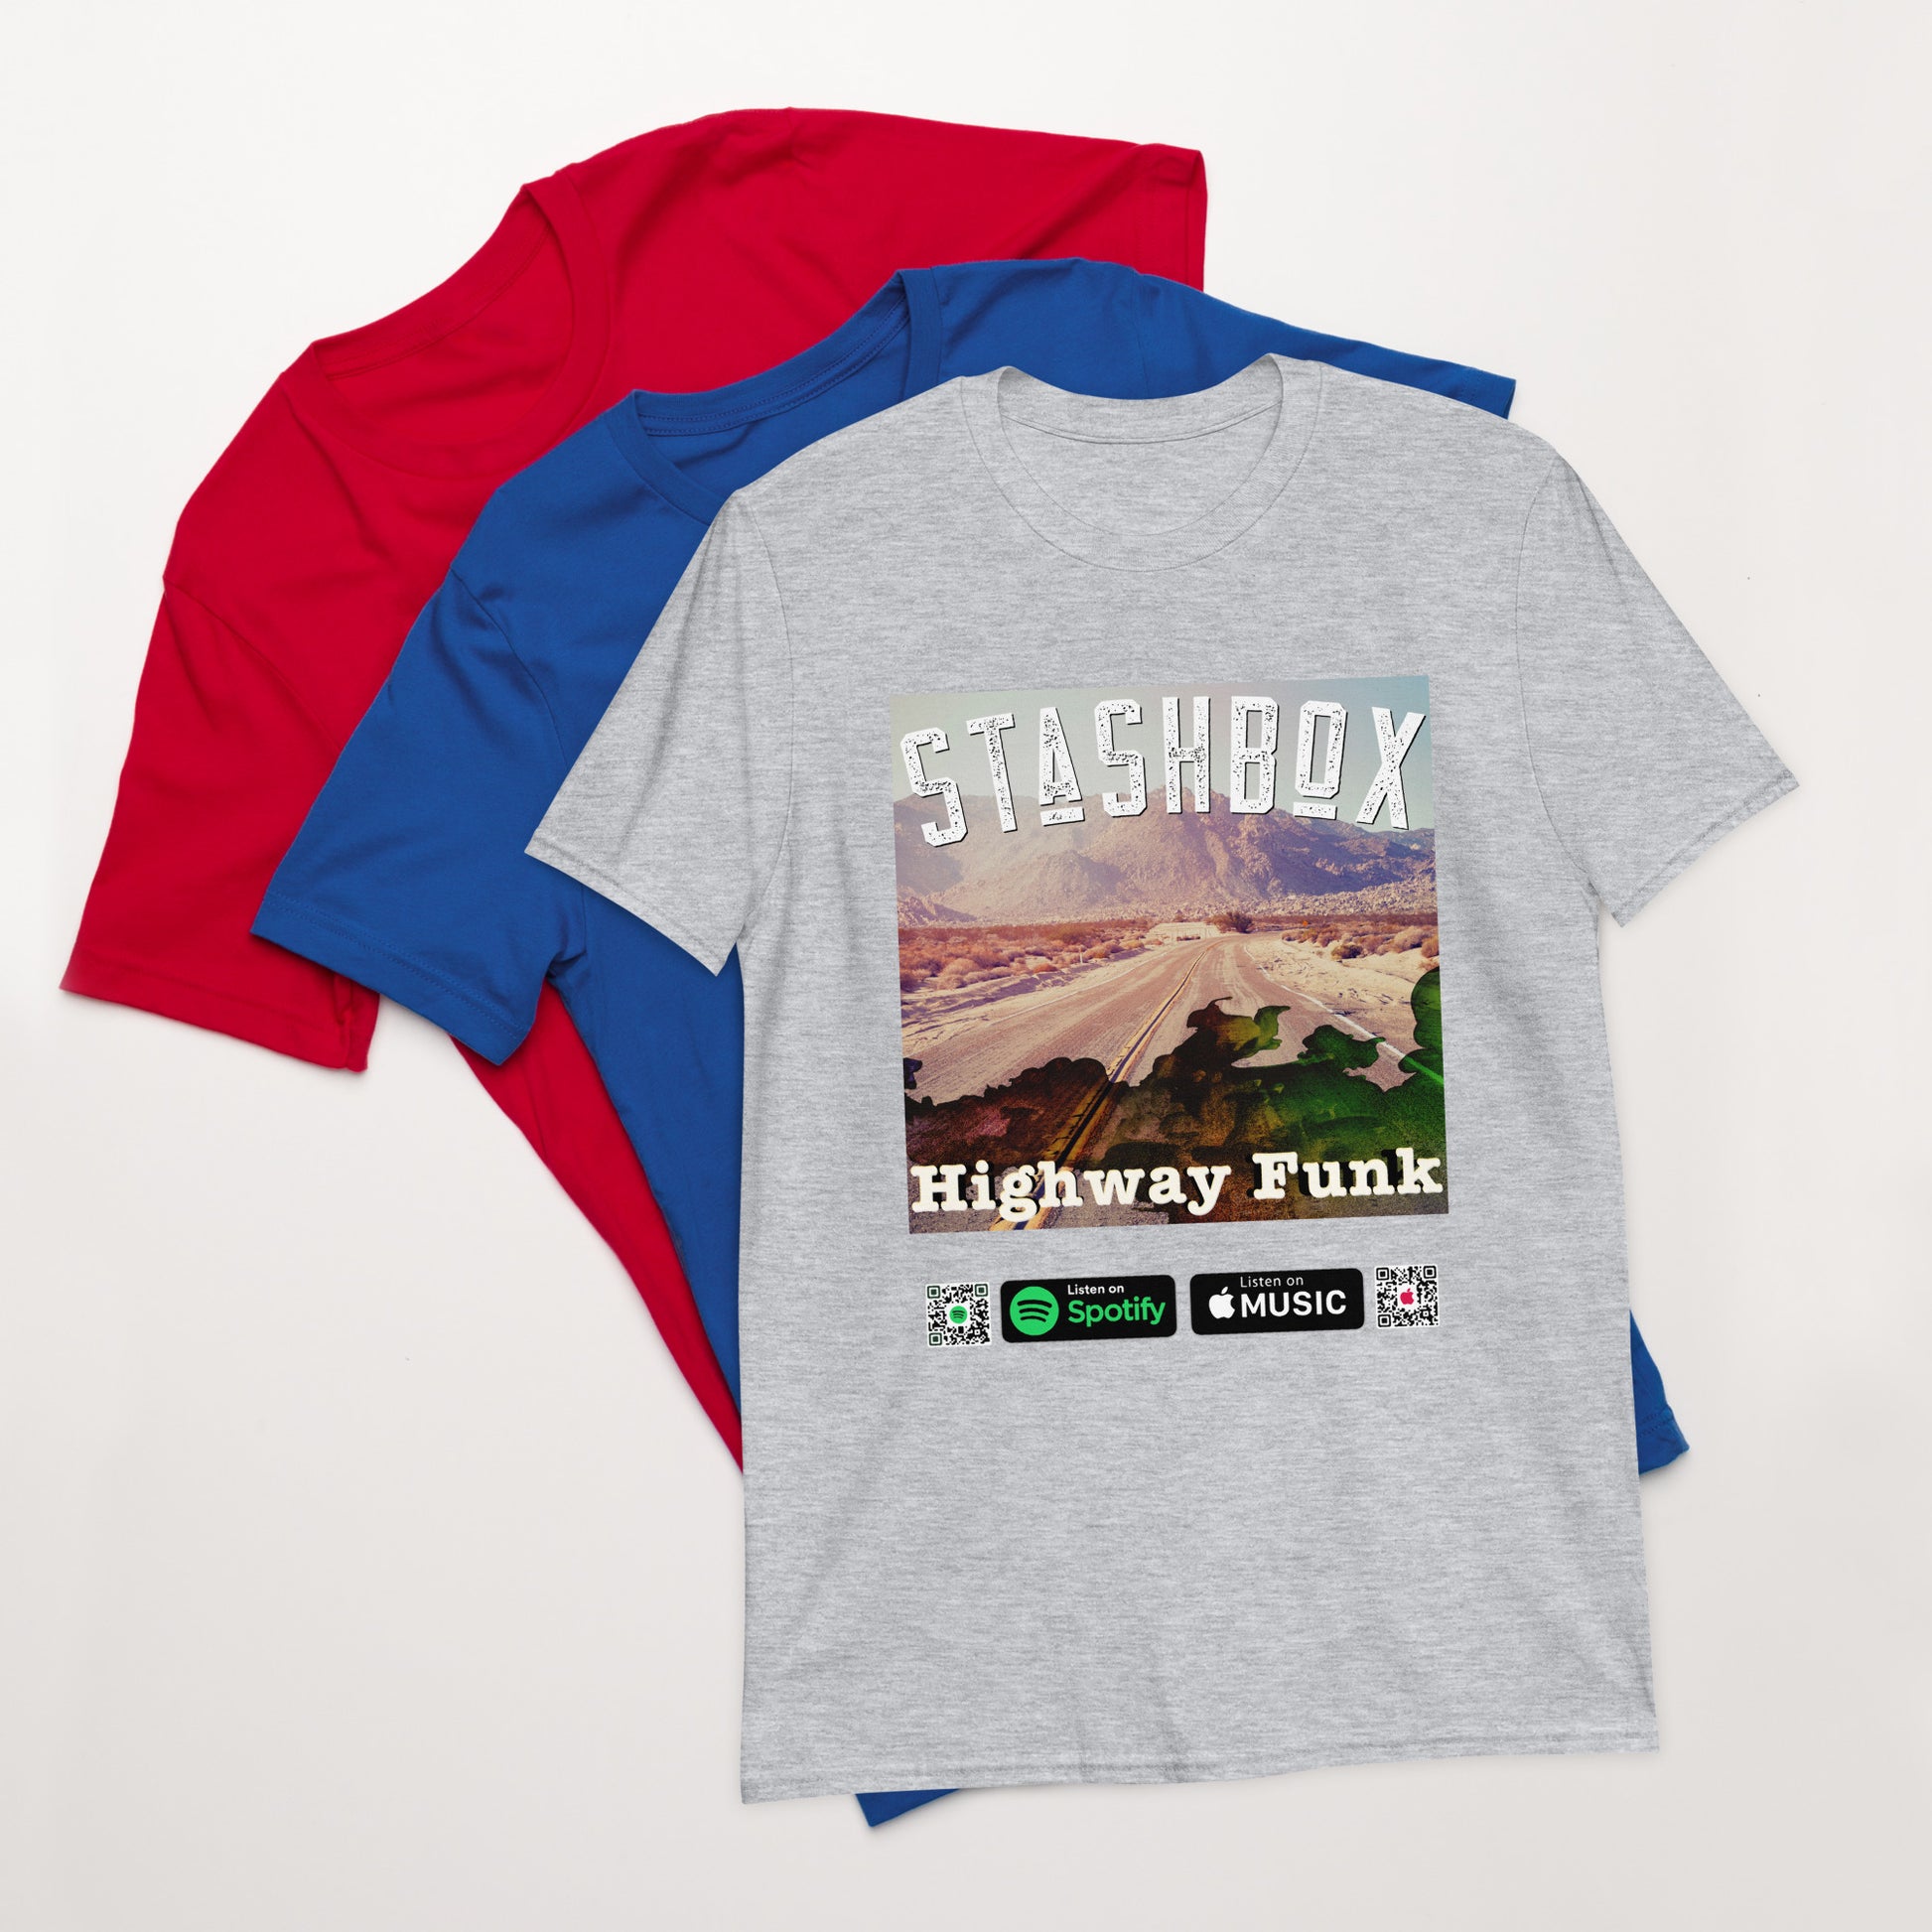 Feel the thrill of the highway with our Design #020 Short-Sleeve Unisex T-Shirt. Your fashion, your artistic journey, exclusively at Stashbox.ai.